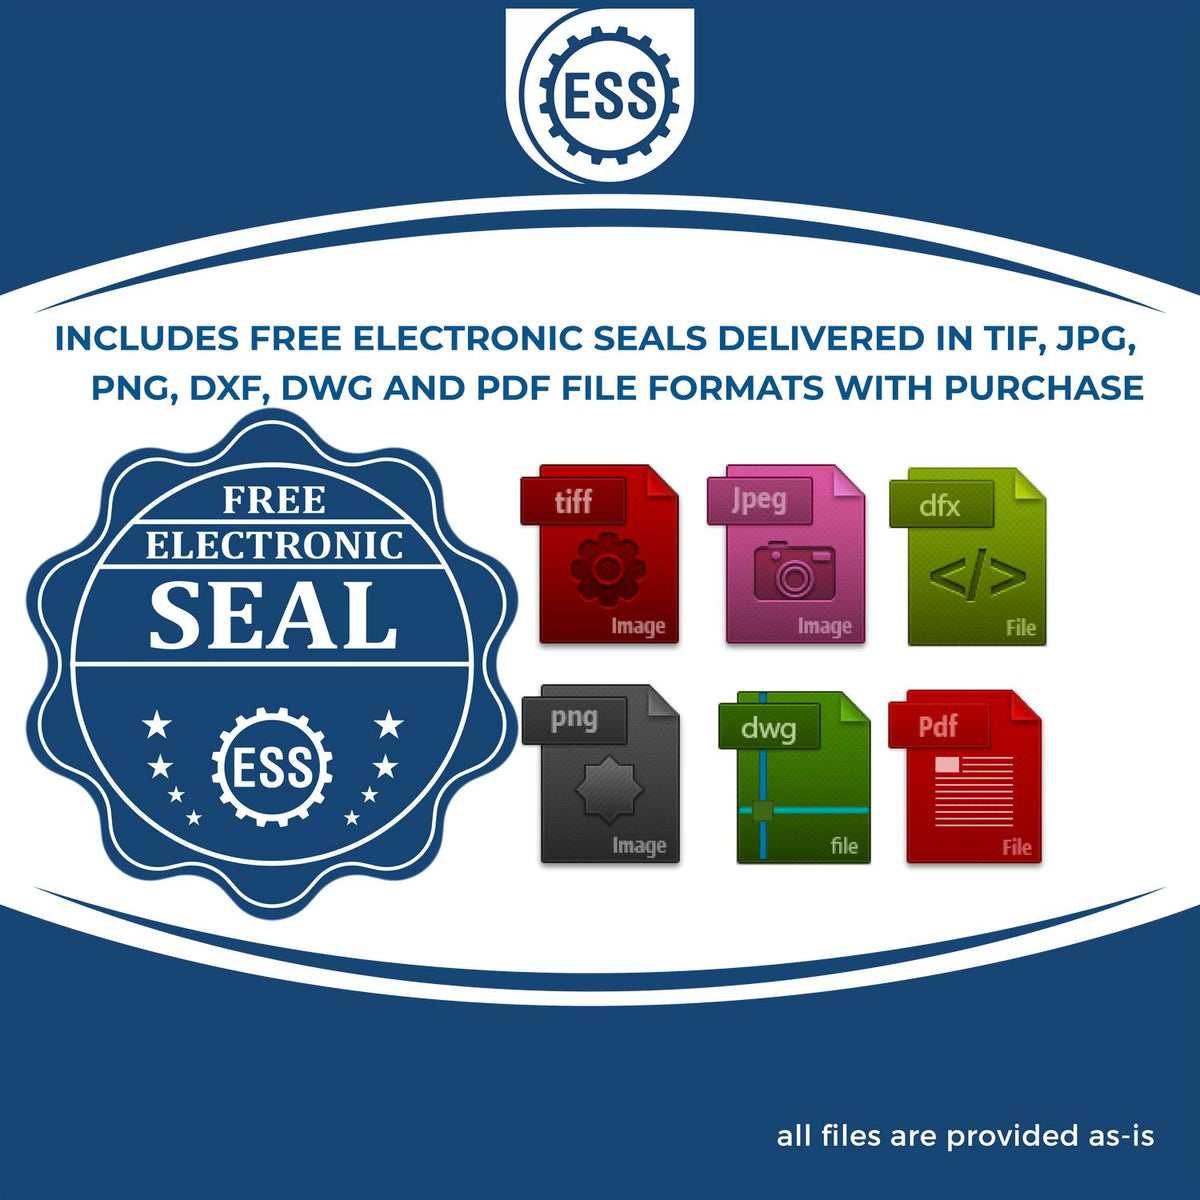 An infographic for the free electronic seal for the Wooden Handle Louisiana State Seal Notary Public Stamp illustrating the different file type icons such as DXF, DWG, TIF, JPG and PNG.